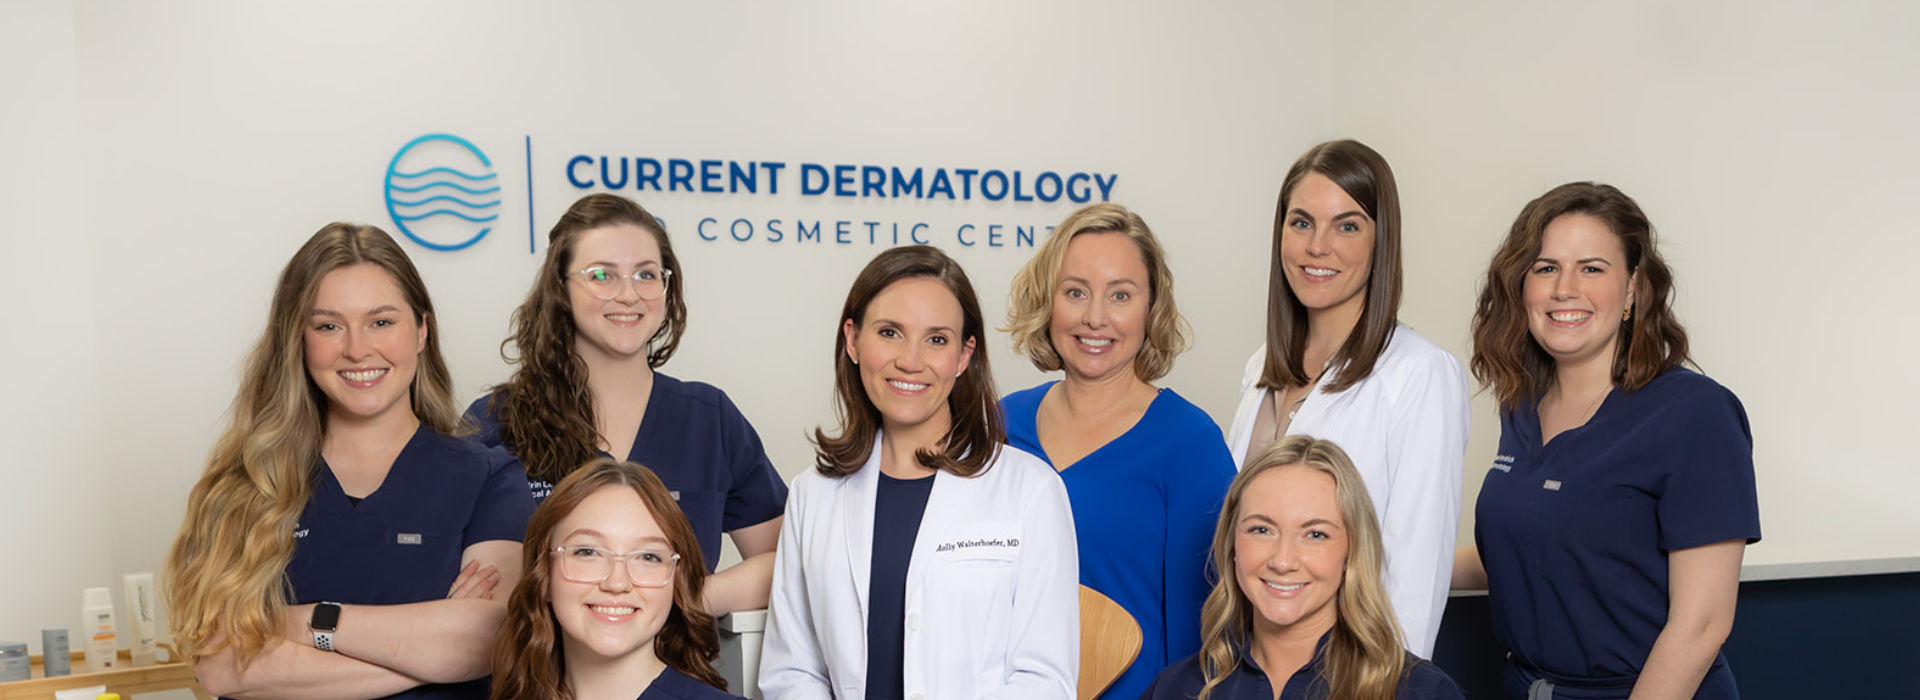 Current Dermatology and Cosmetic Center Team